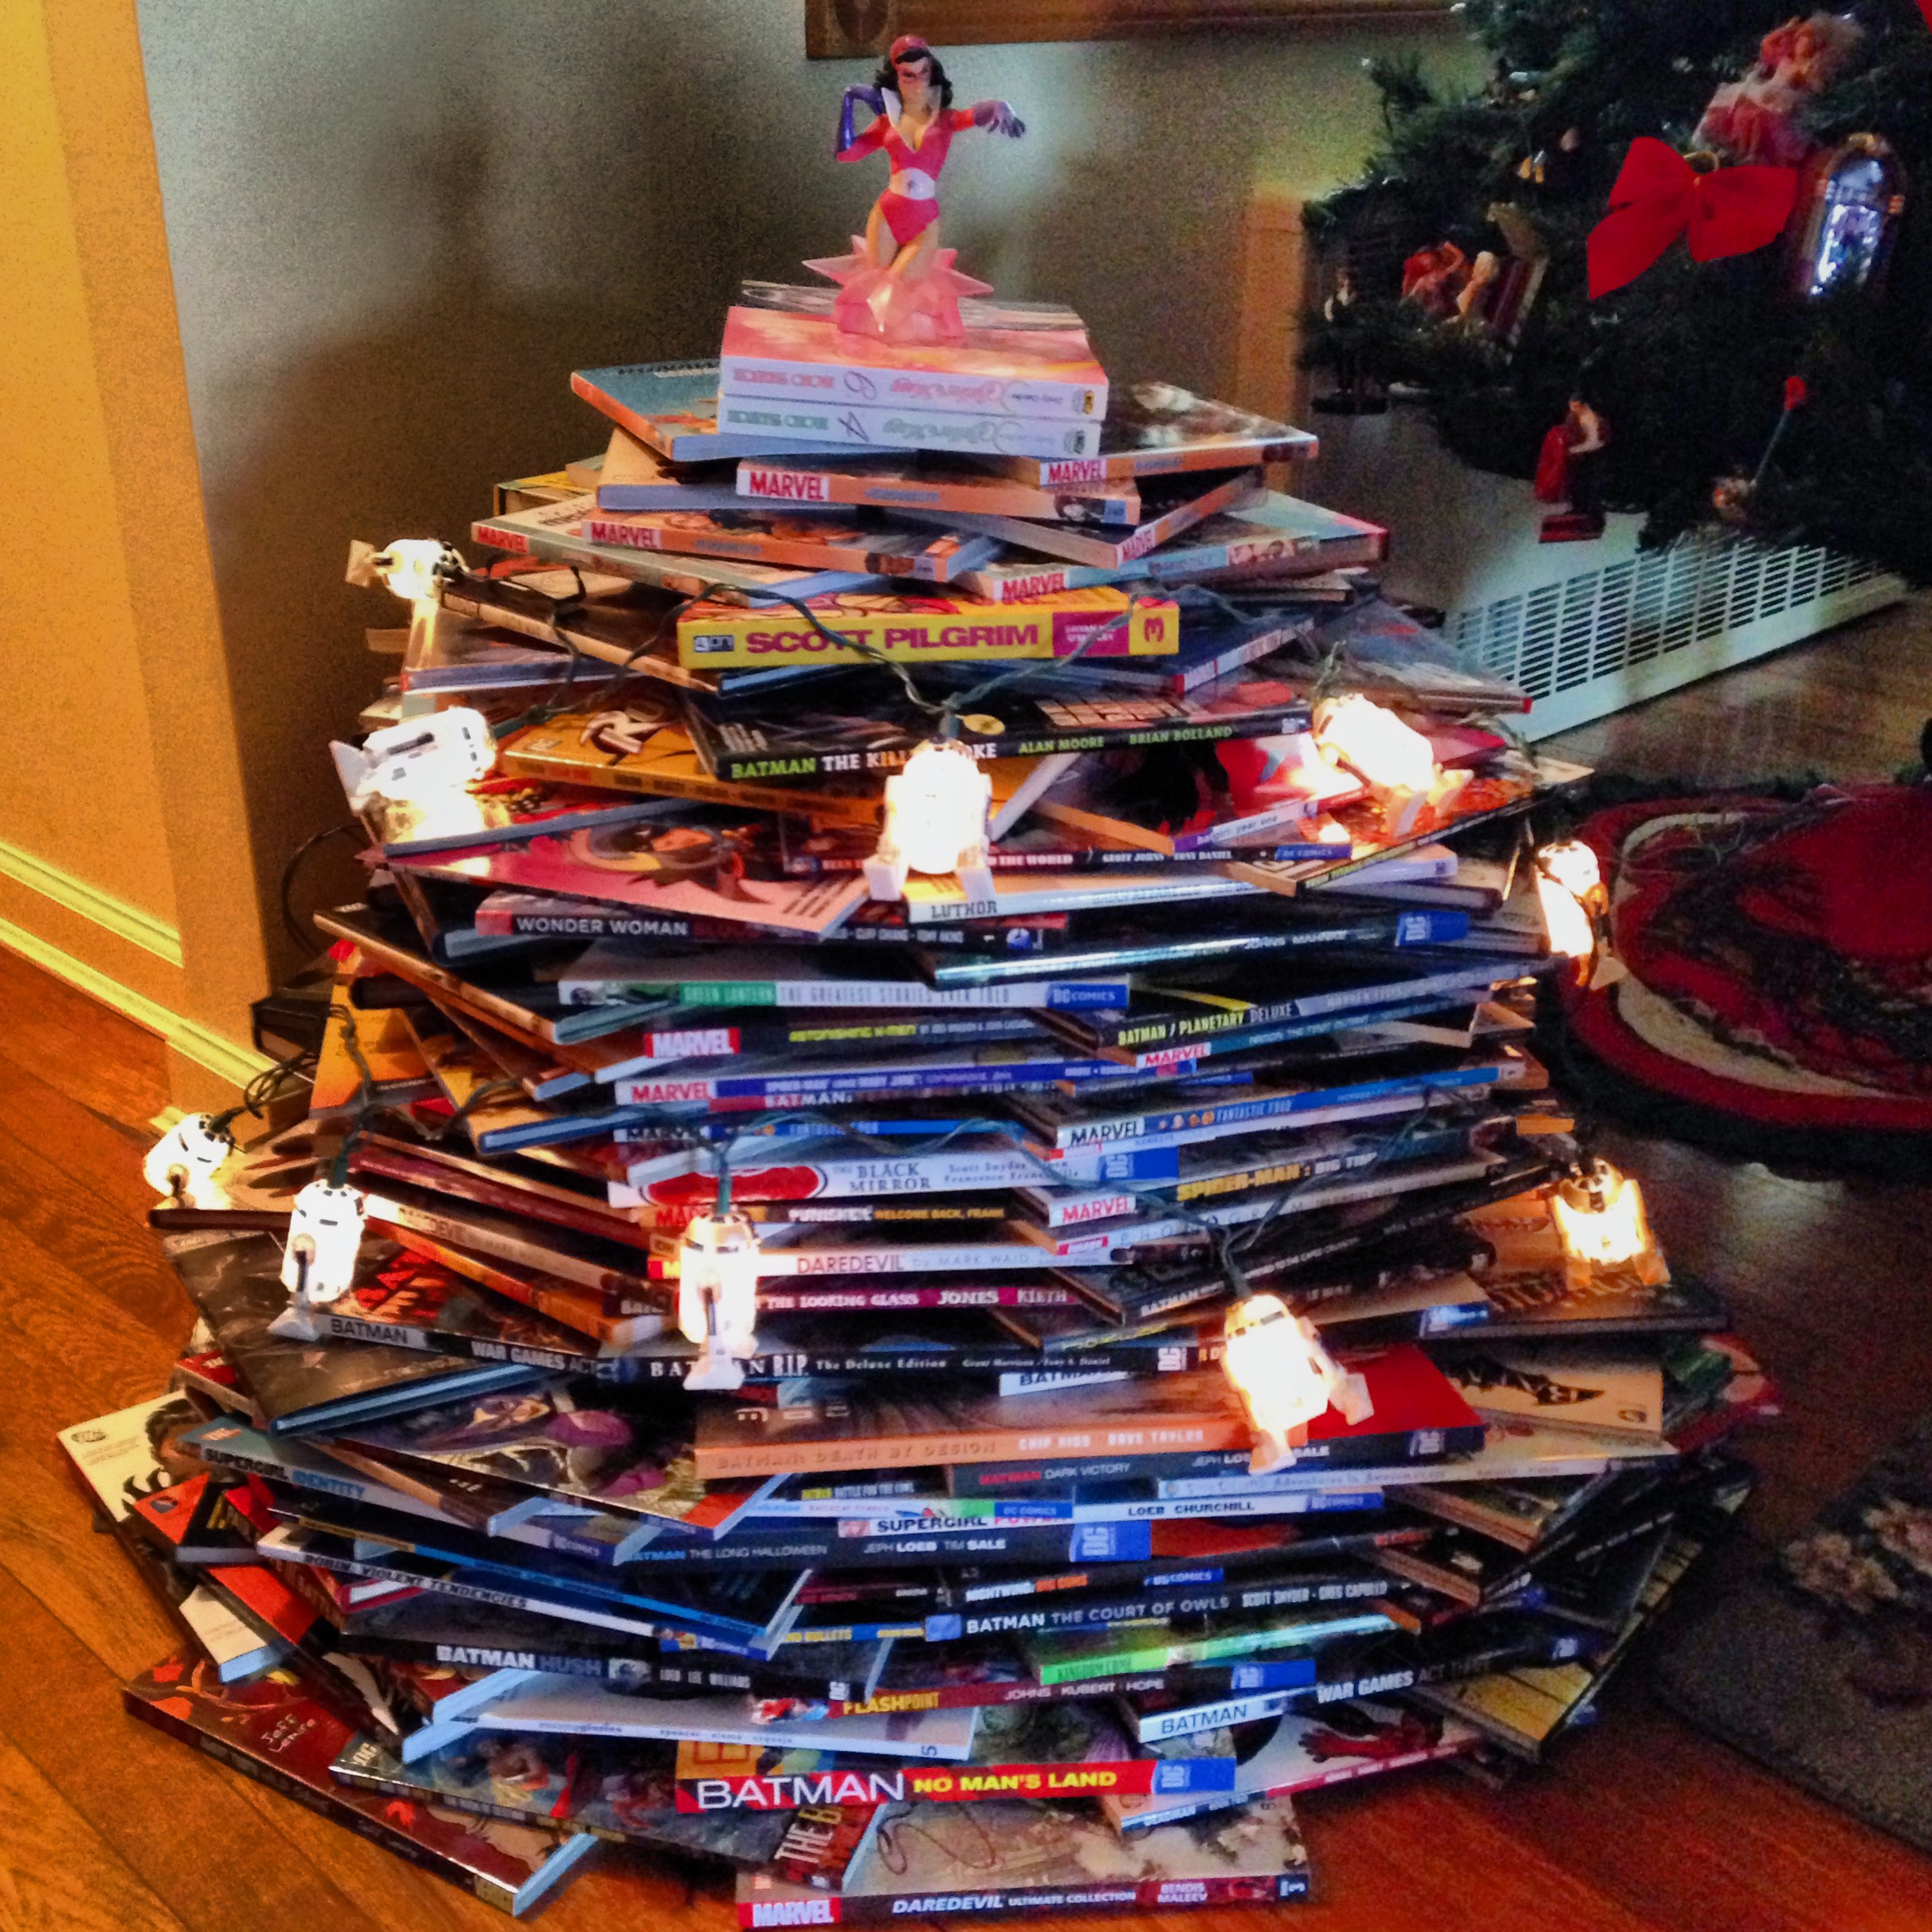 27 Awesomely Nerdy Christmas Trees